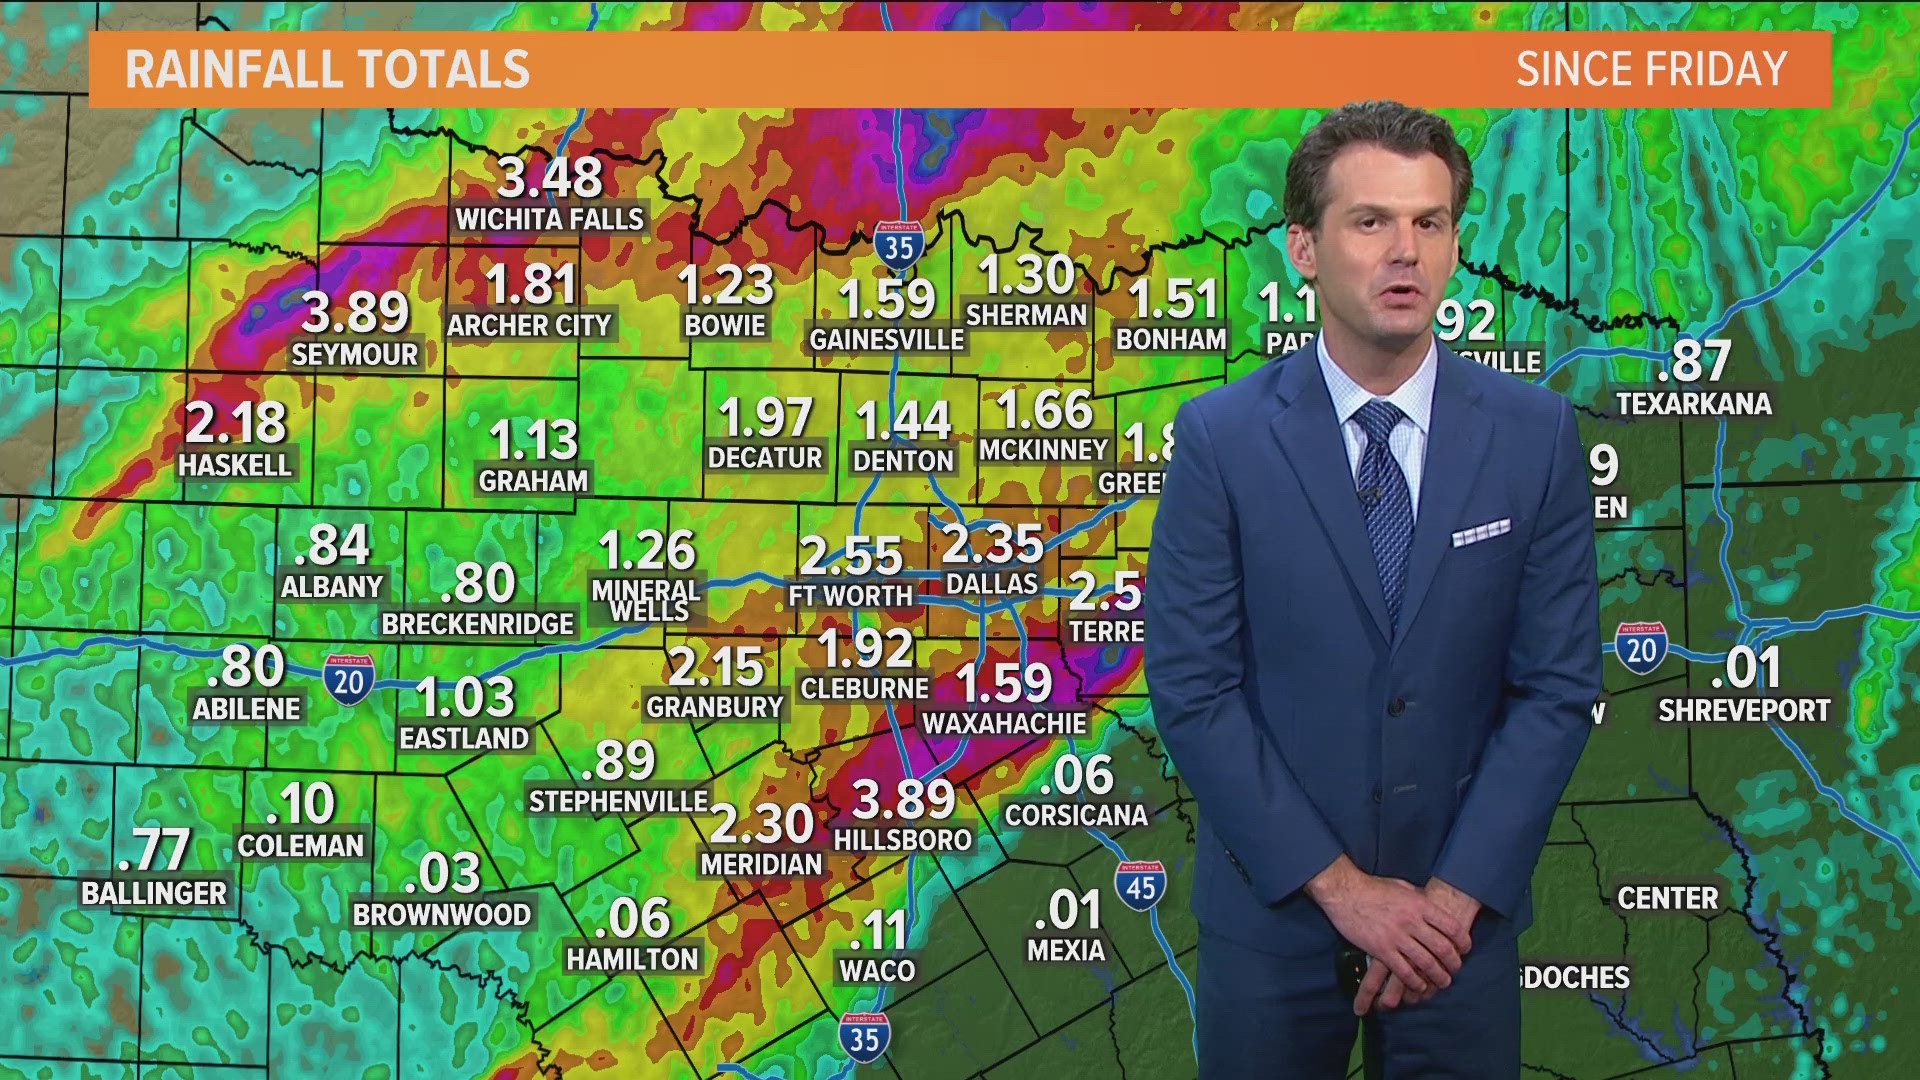 Areas of North Texas saw over three inches of rainfall over the weekend.